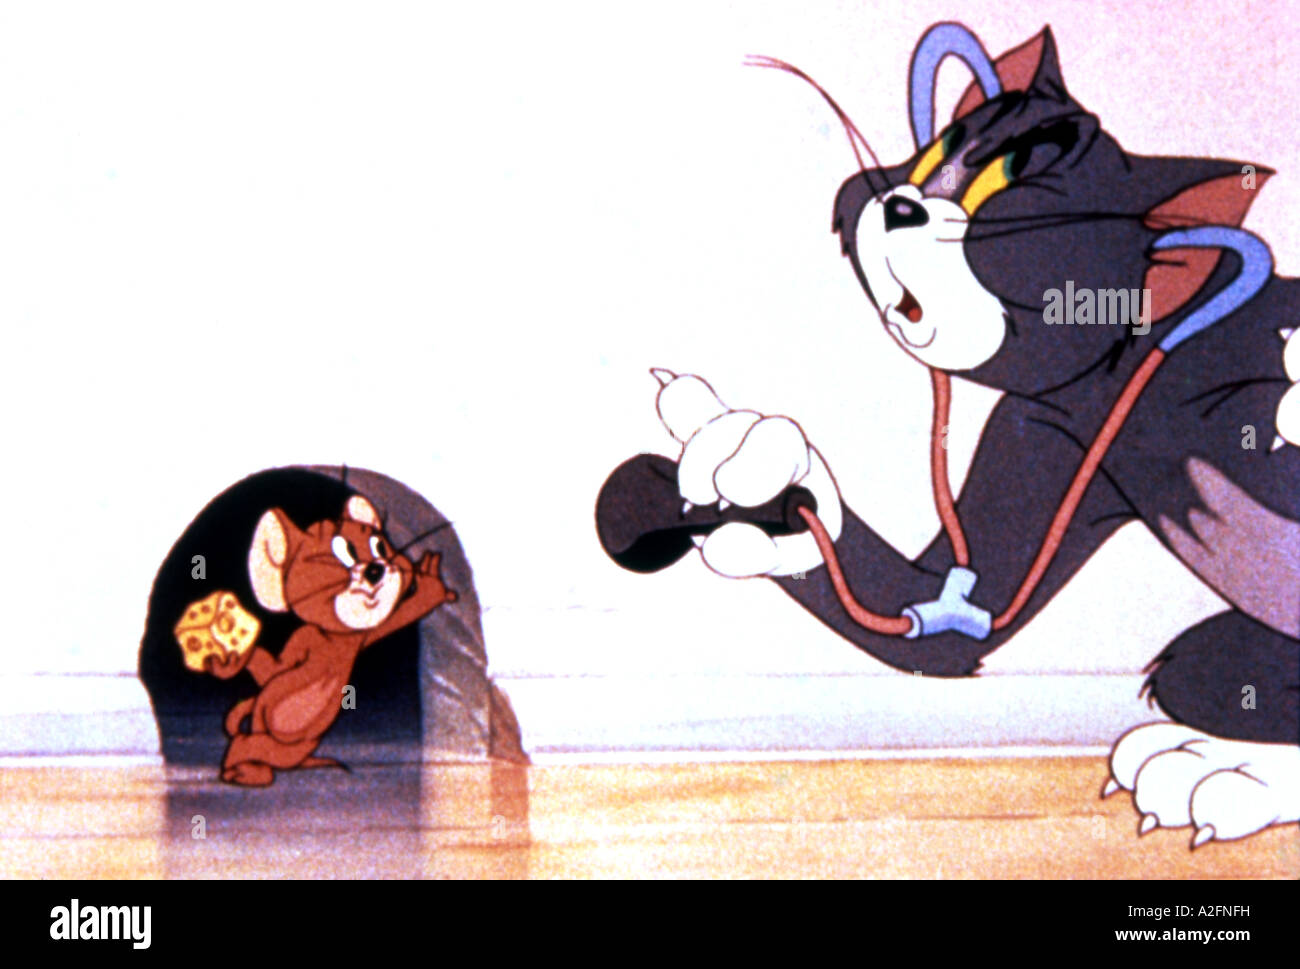 TOM AND JERRY Hanna-Barbera cartoon characters - nb Editorial use only Stock Photo